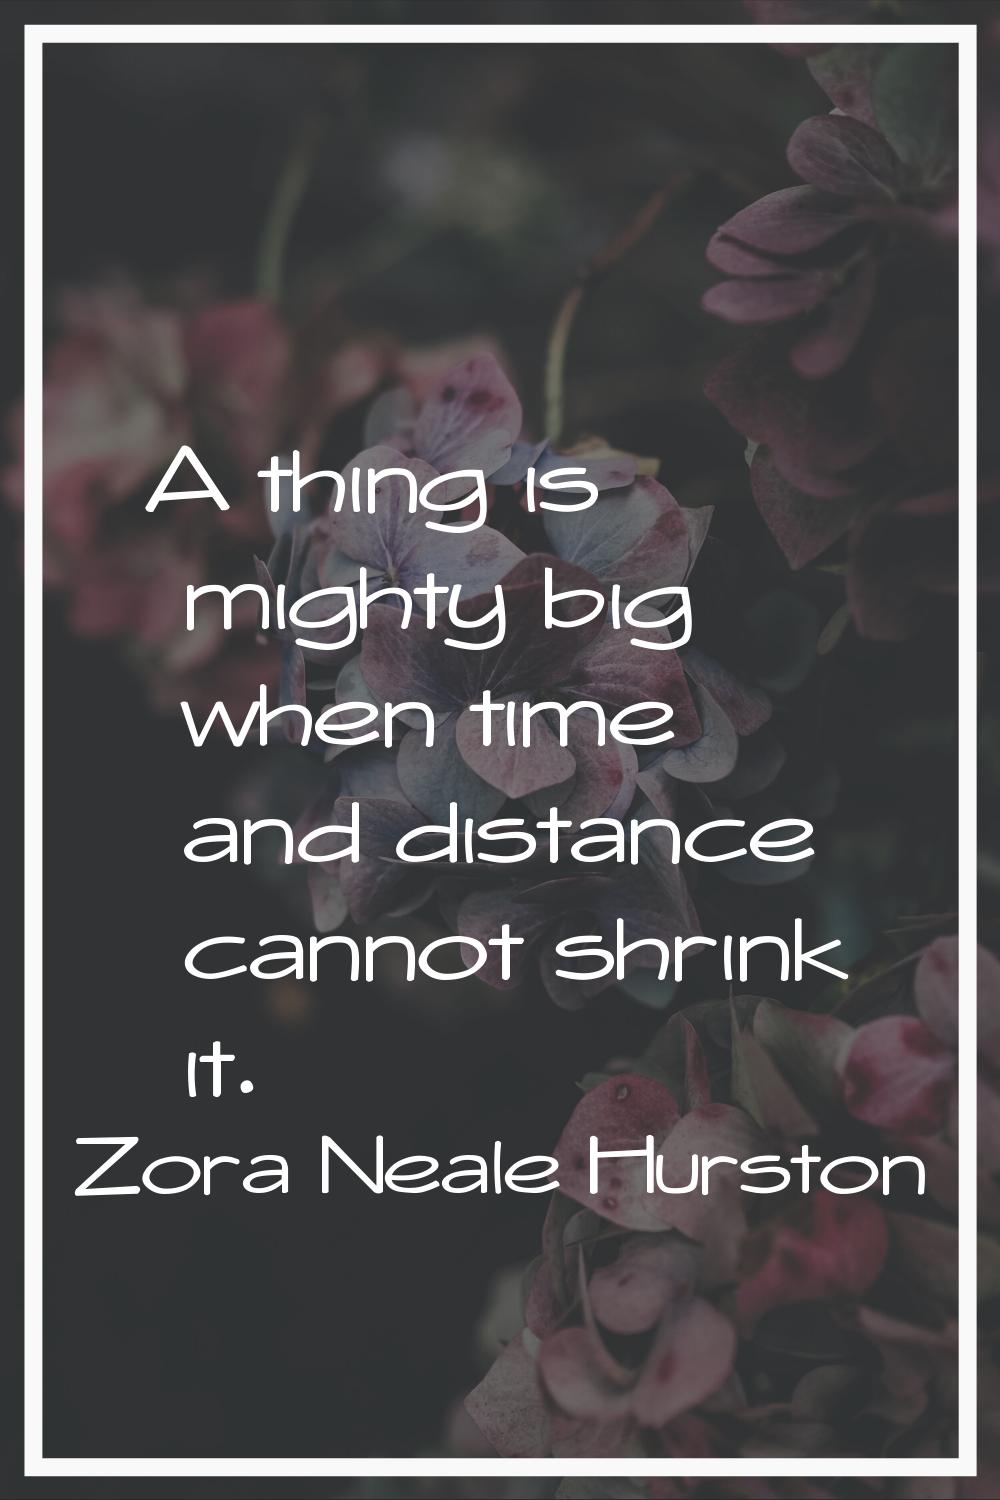 A thing is mighty big when time and distance cannot shrink it.